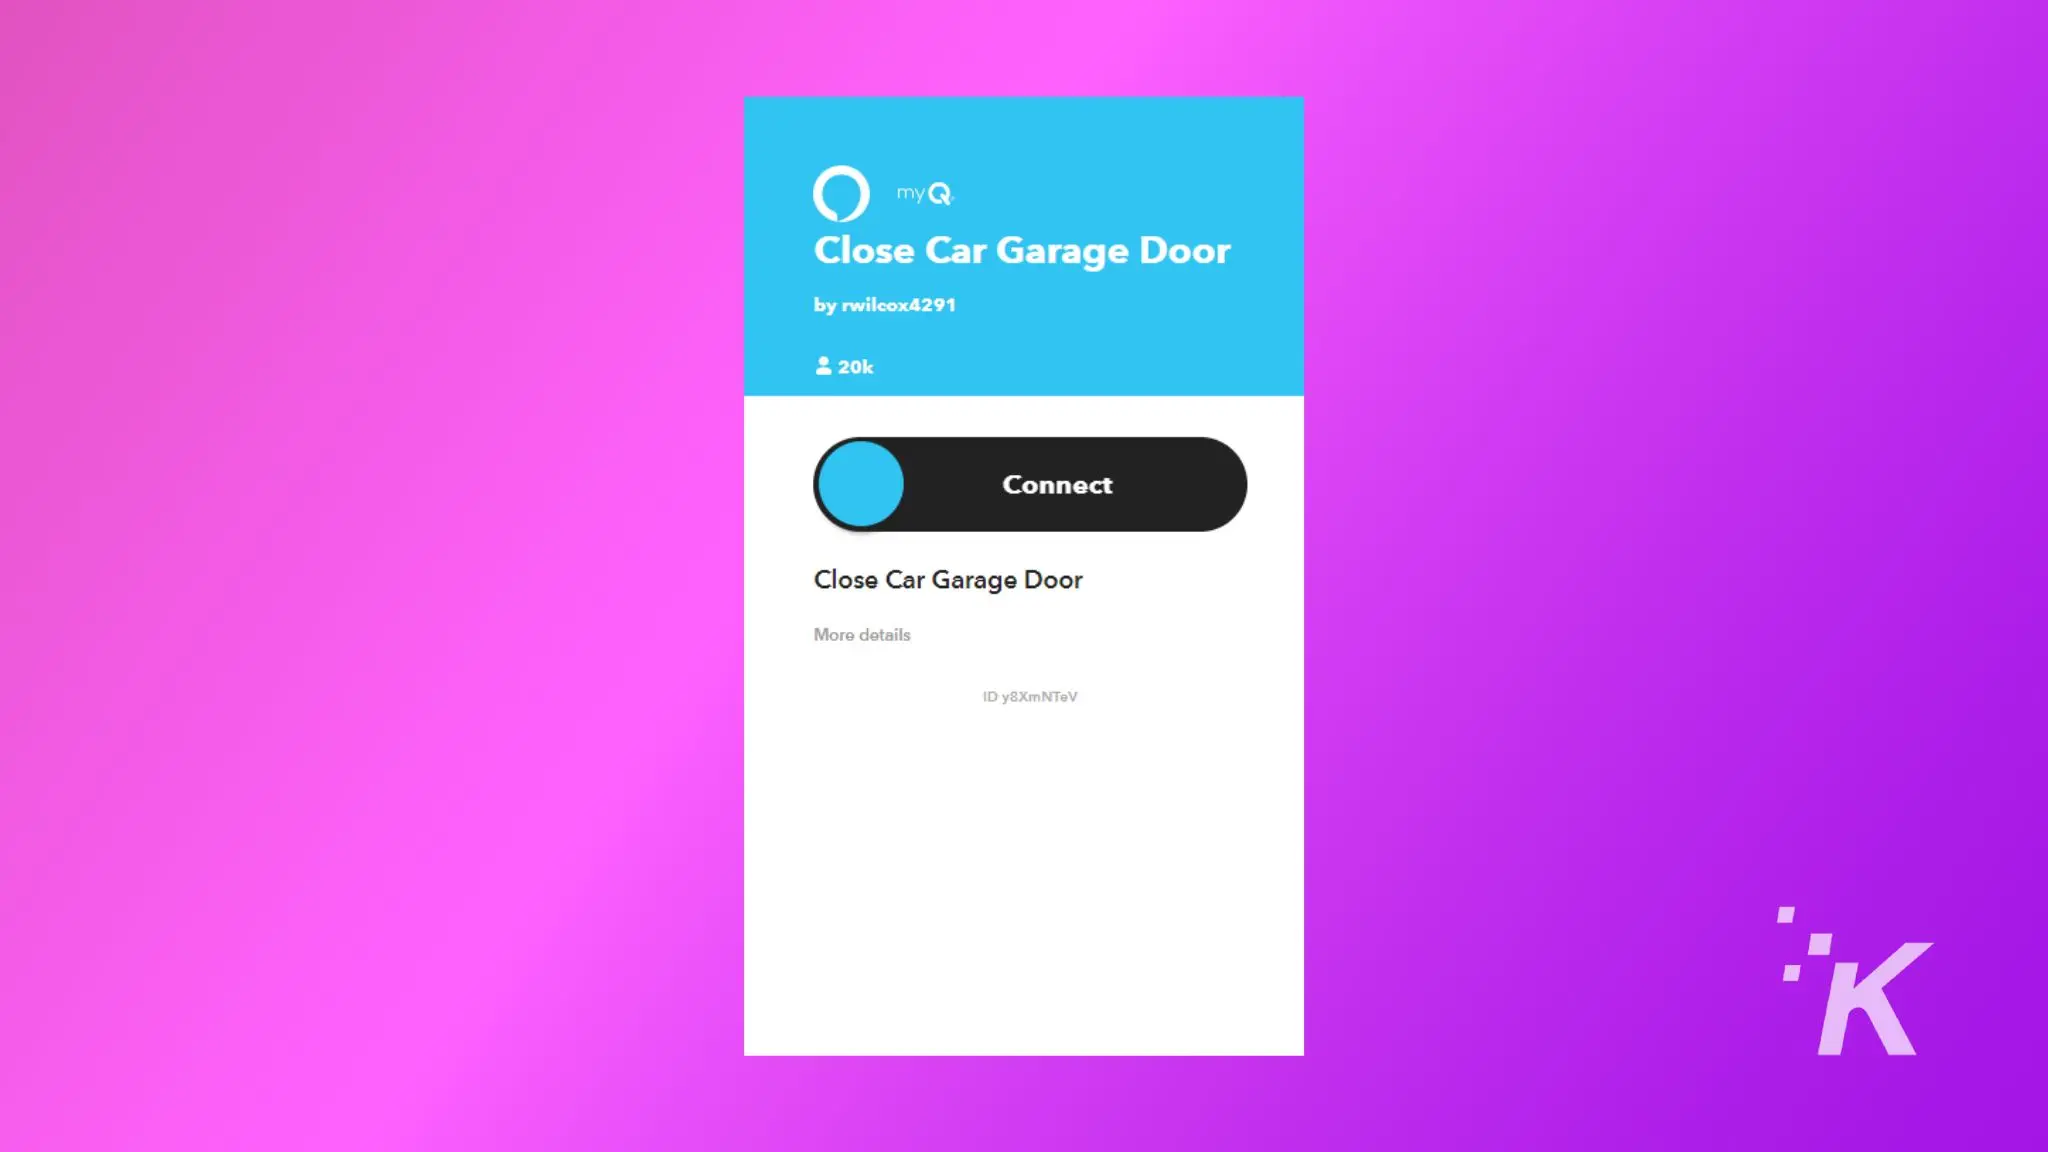 The image is showing the process of remotely closing a car garage door using a myQ app.